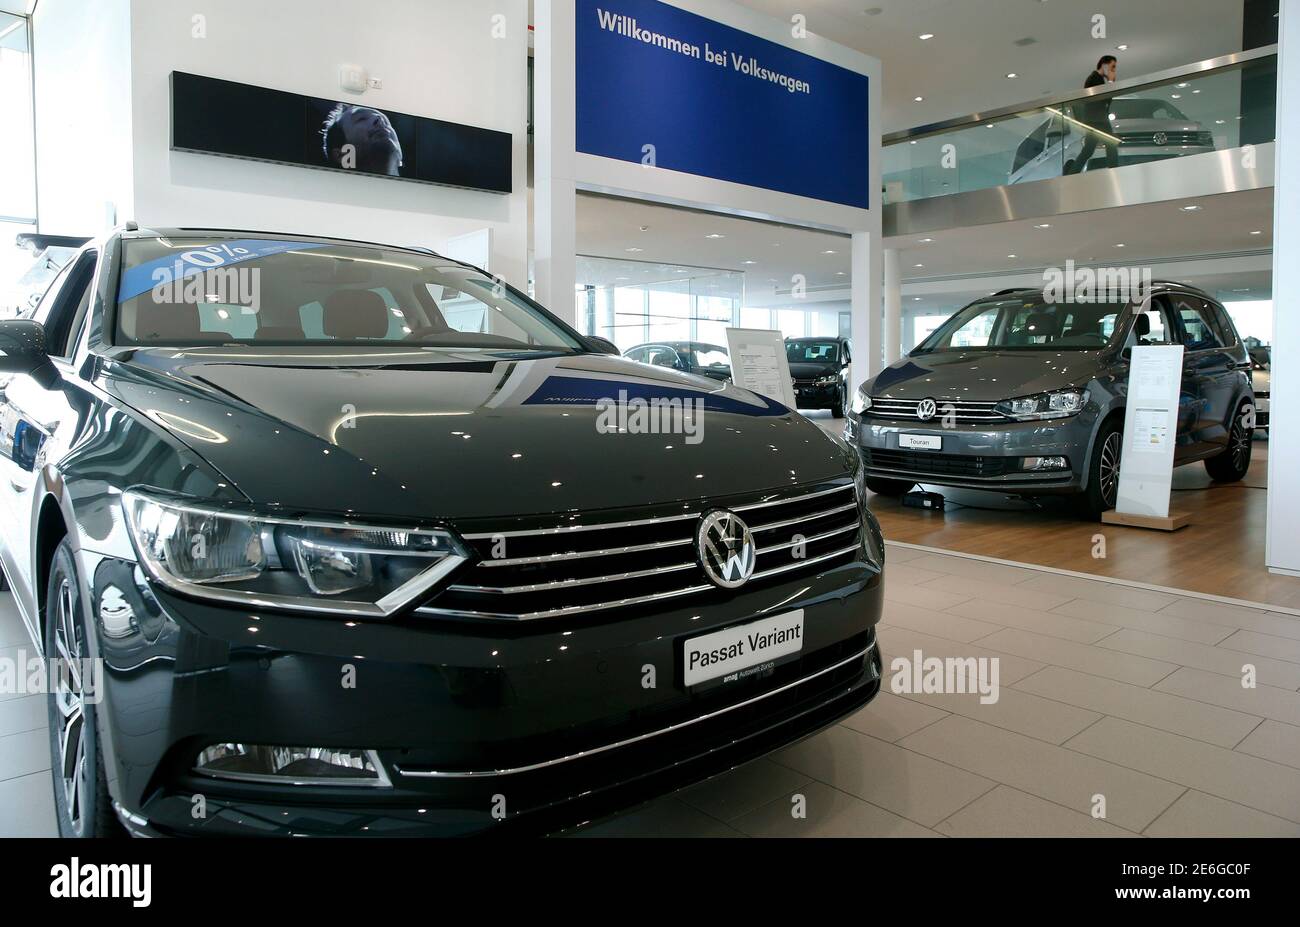 The logo of German carmaker Volkswagen is seen on a Volkswagen Passat car  at a showroom of Swiss car importer AMAG in Duebendorf, Switzerland  February 12, 2016. REUTERS/Arnd Wiegmann Stock Photo - Alamy